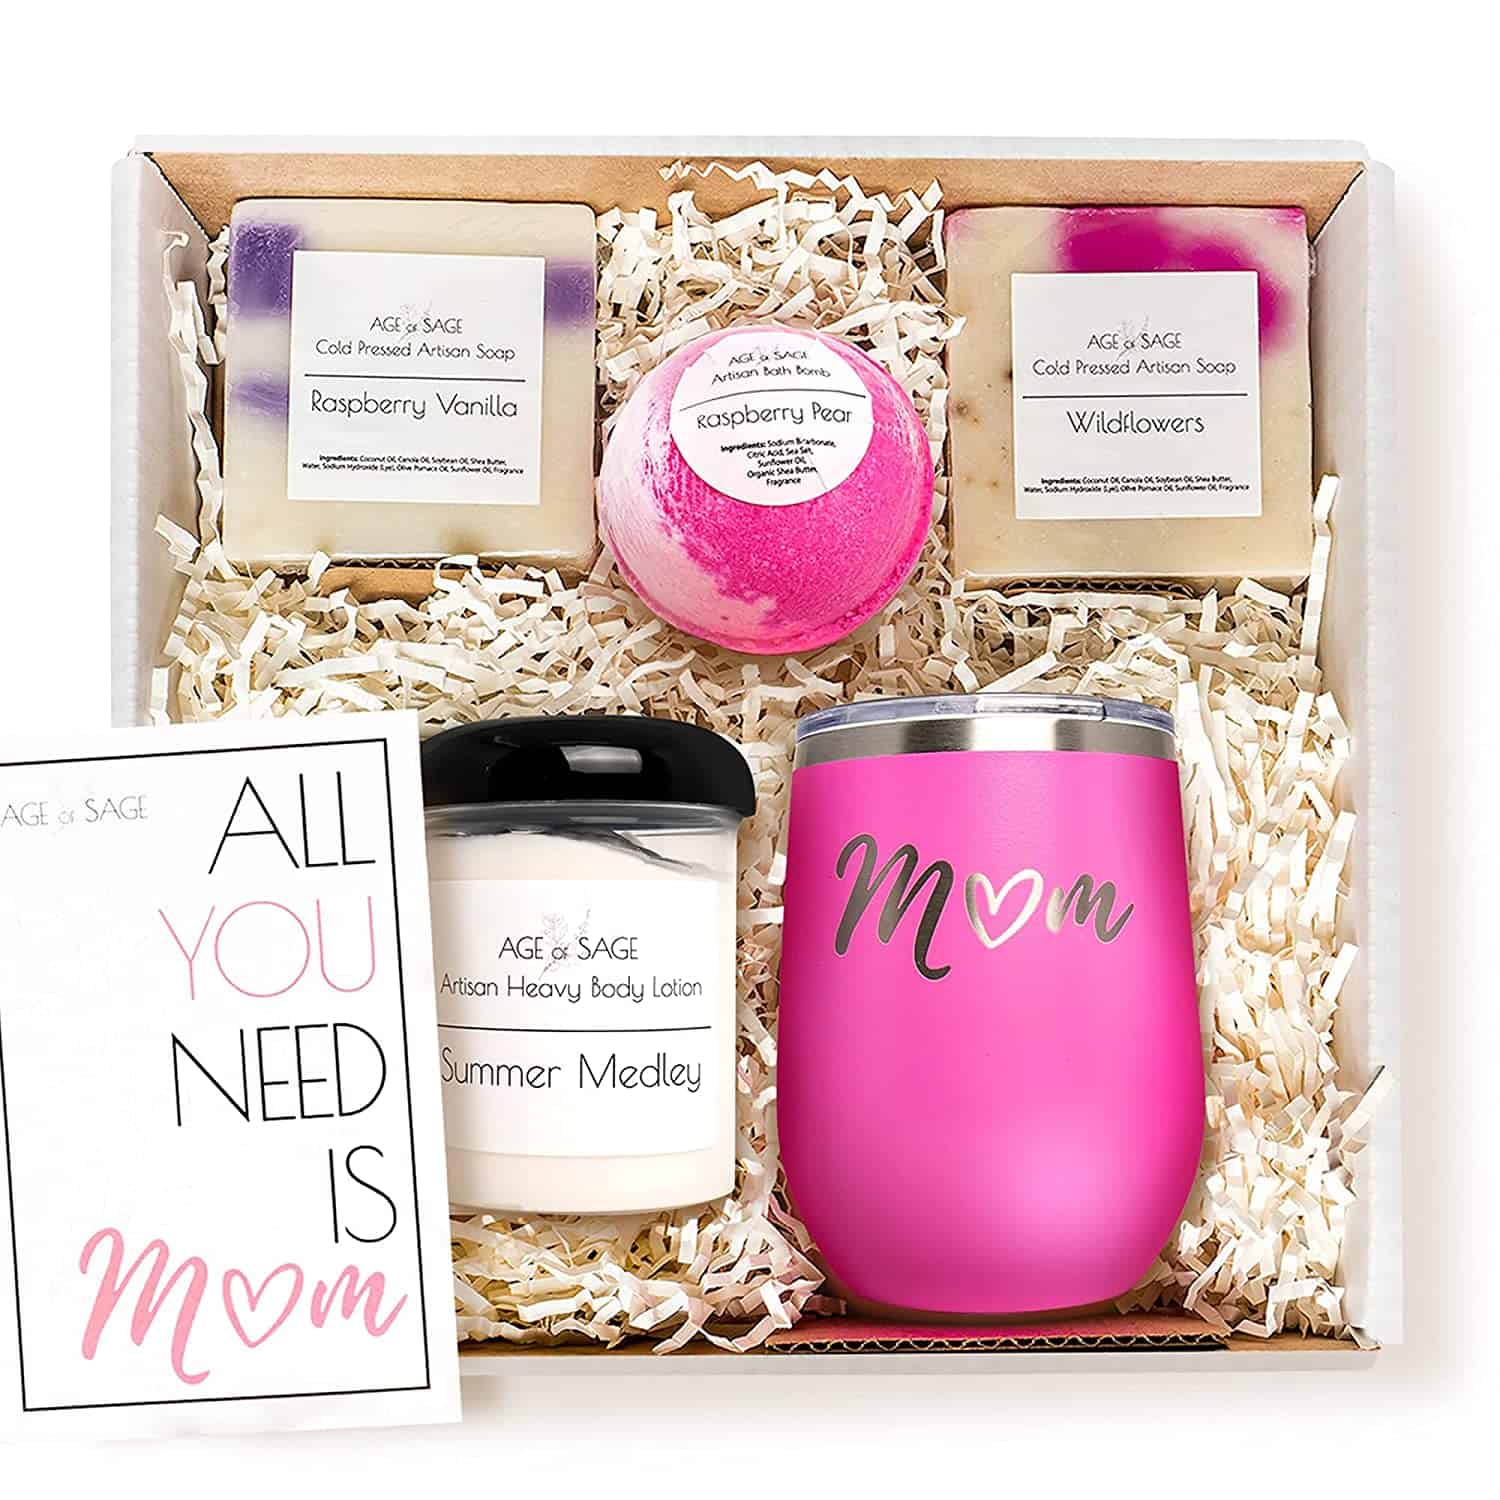 All you need is mom gift set available on Amazon marketplace.